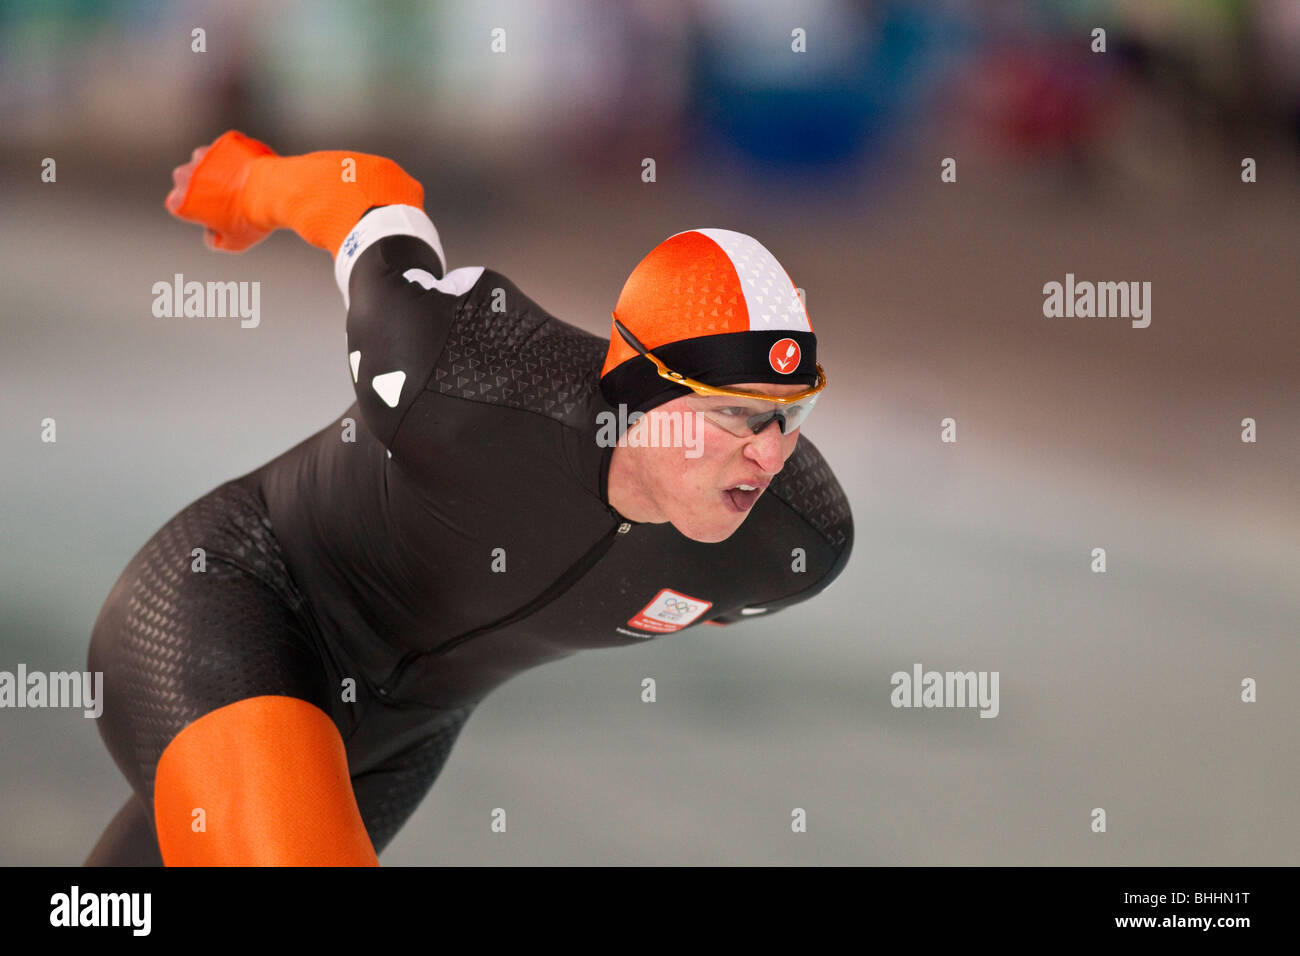 Sven Kramer (NED) winning the gold medal in the 5000m Speed Skating at the 2010 Olympic Winter Games Stock Photo